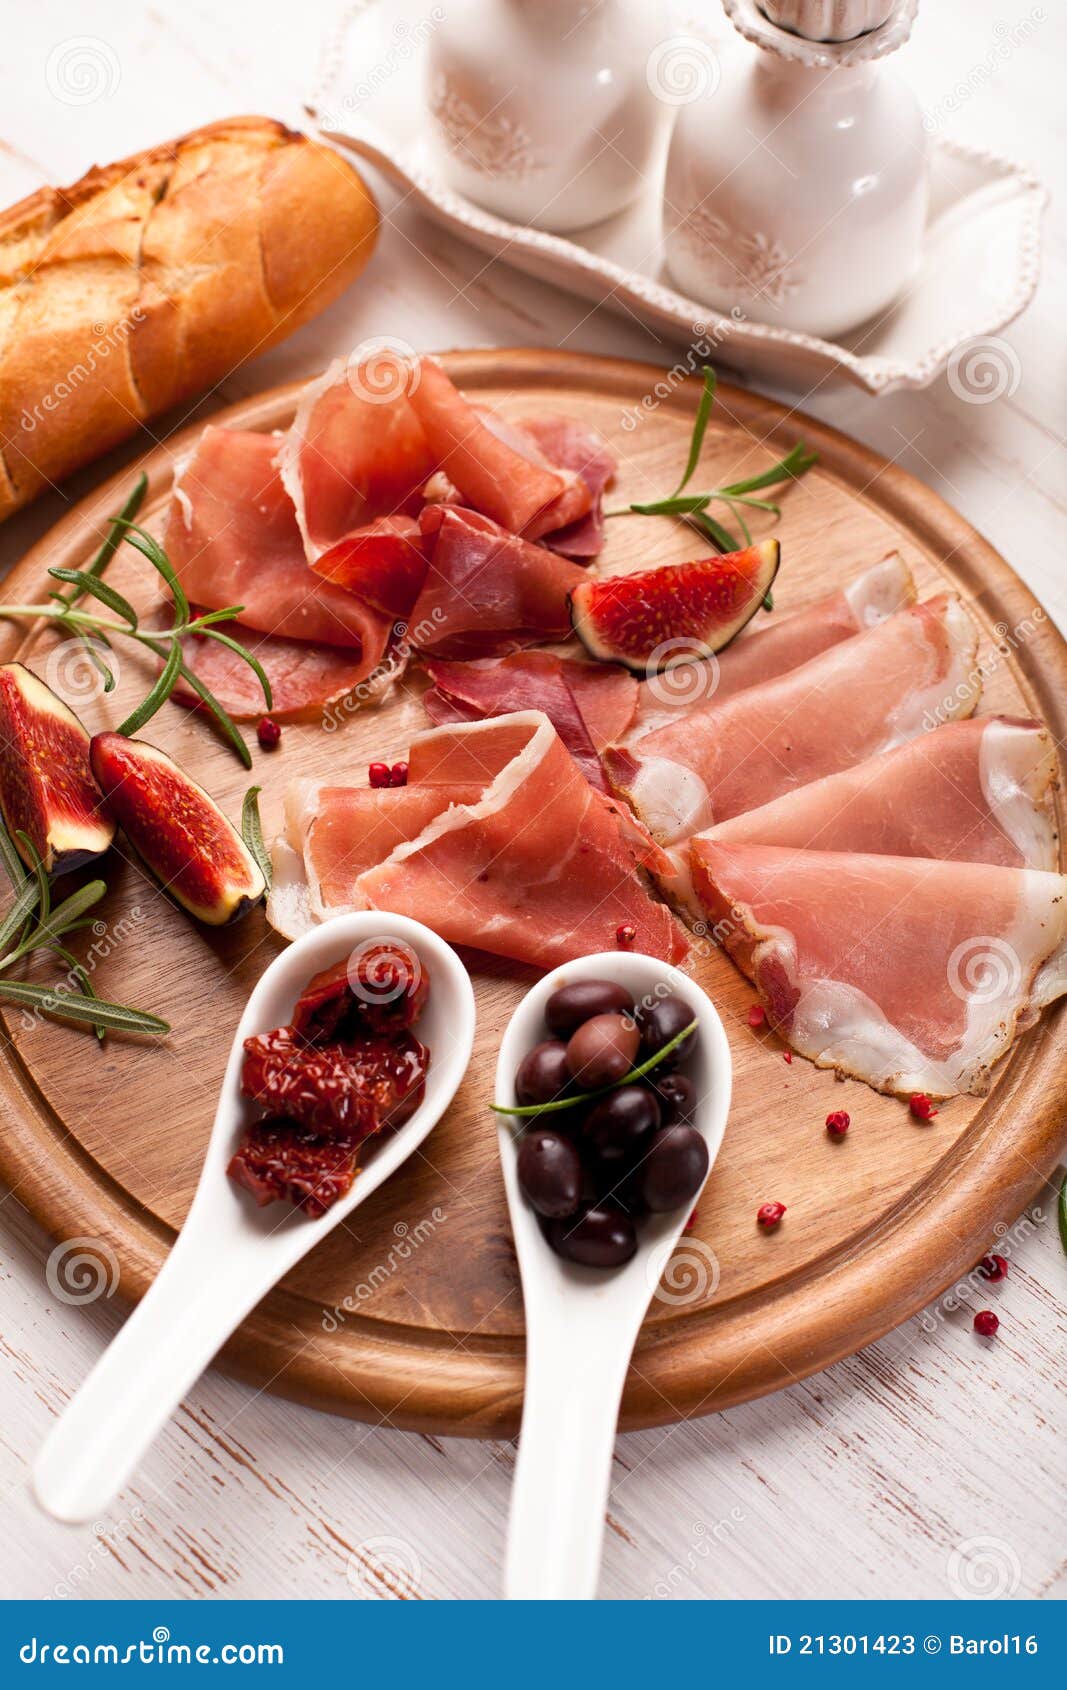 Mediterranean Cold Cuts Stock Image Image Of Appetizer